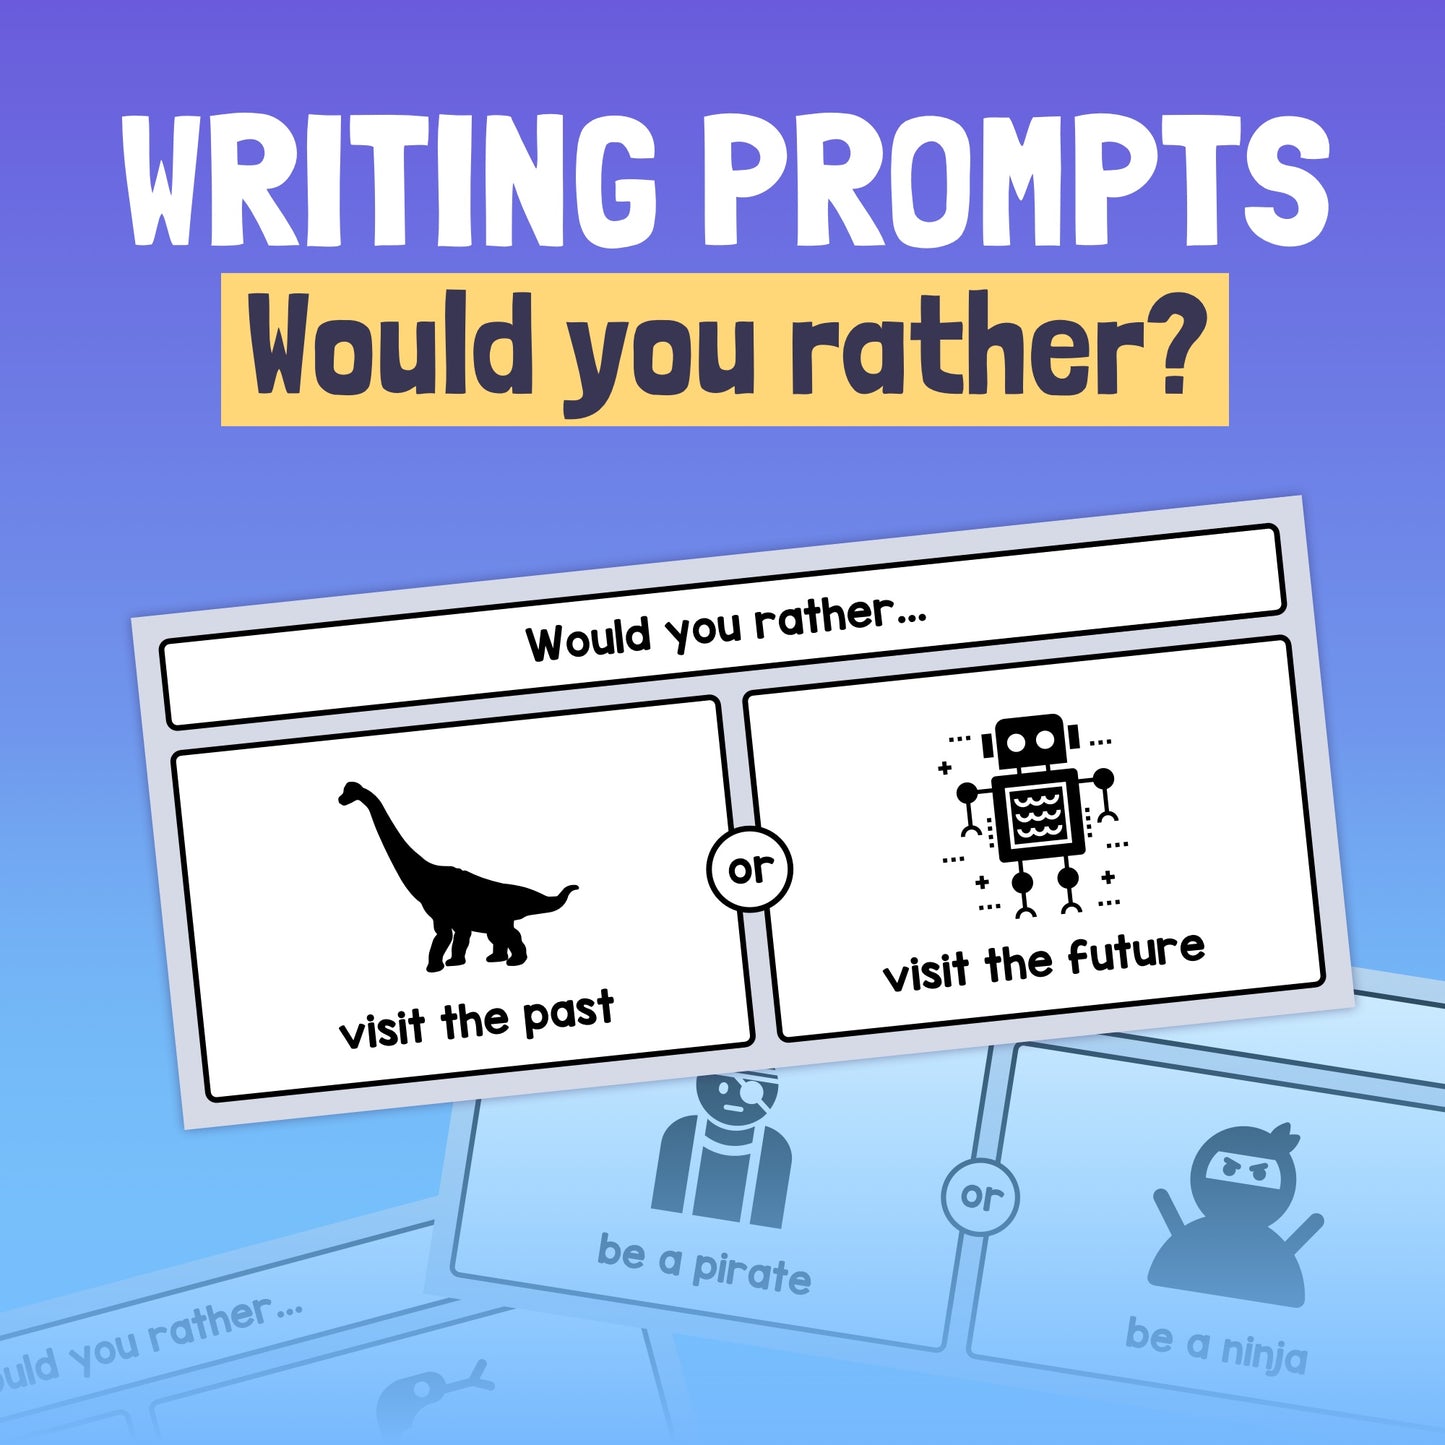 Would you Rather? Writing Prompts